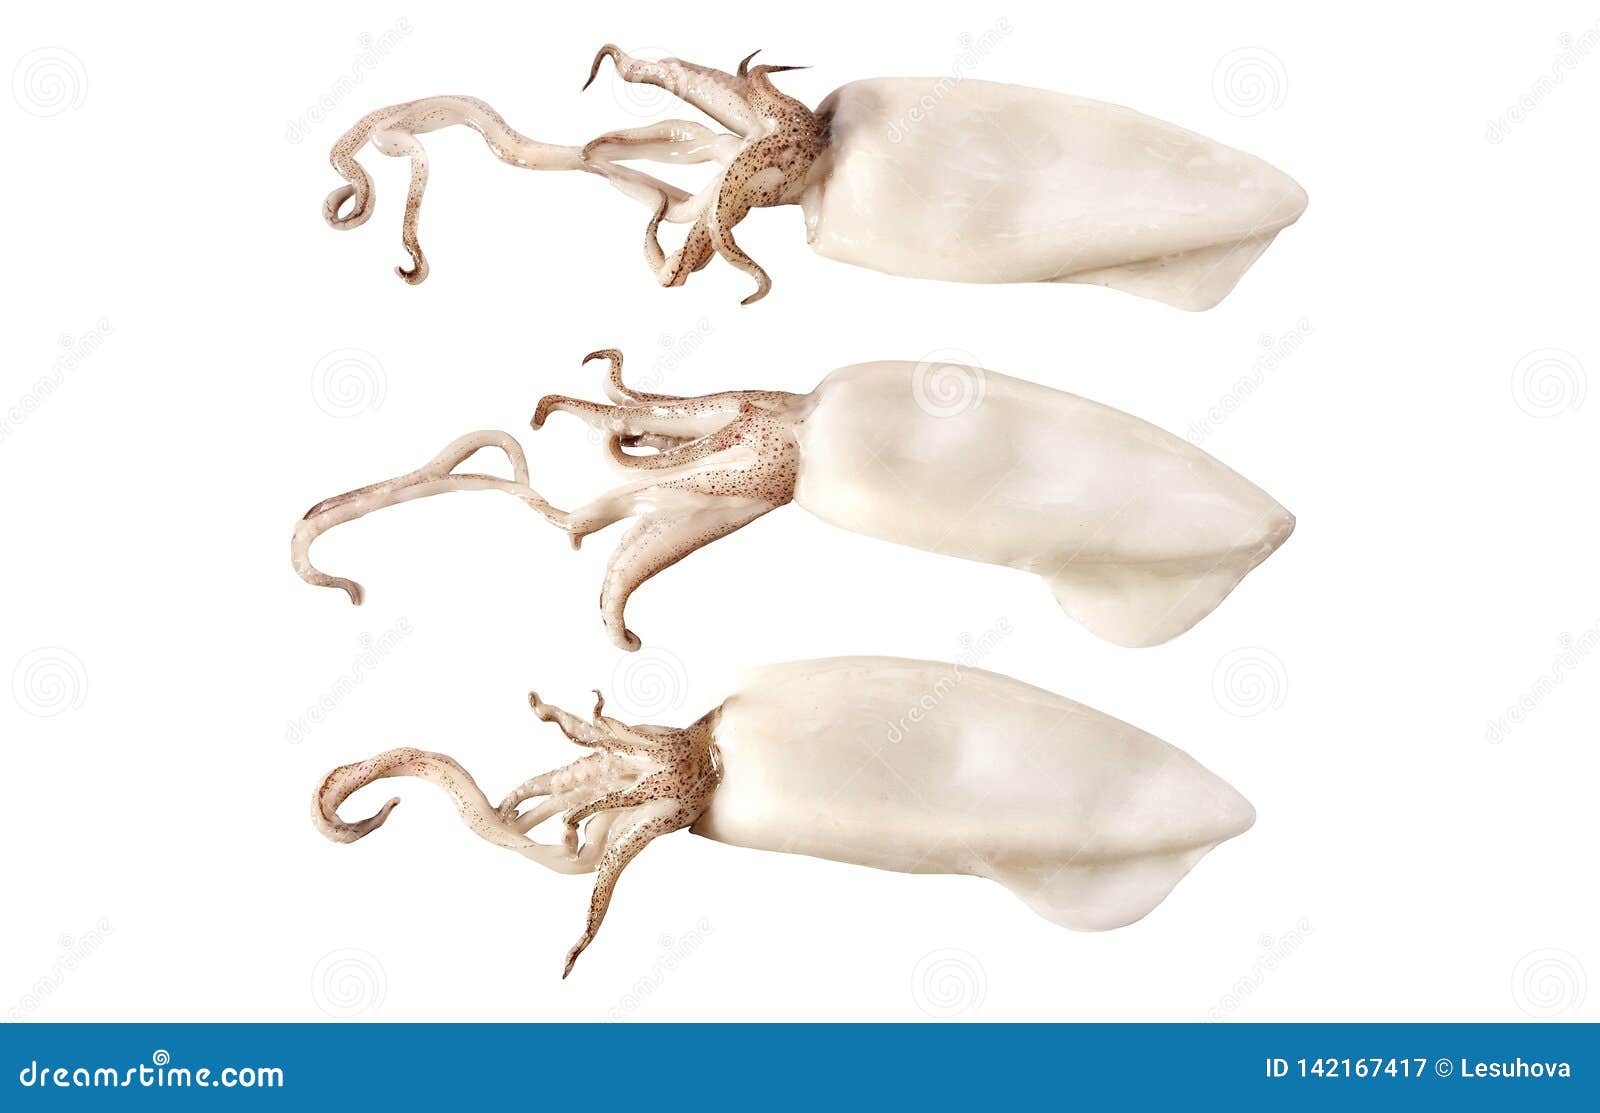 Three Young Baby Squid Stock Image Image Of Eating